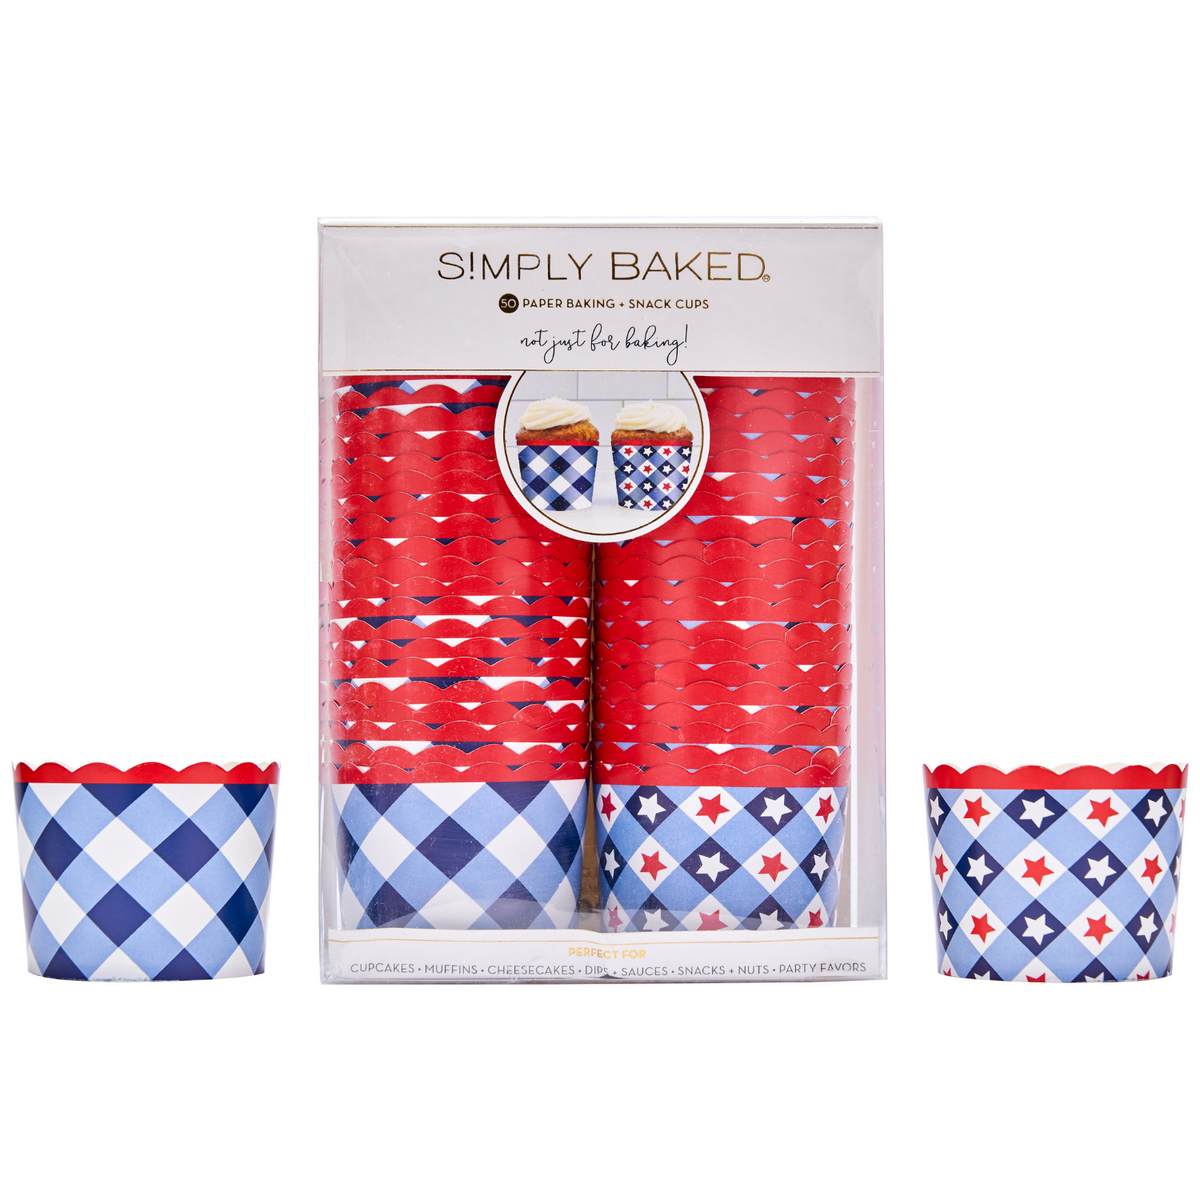 Simply Baked | Large Paper Baking Cups | Patriotic Gingham | 50 ct